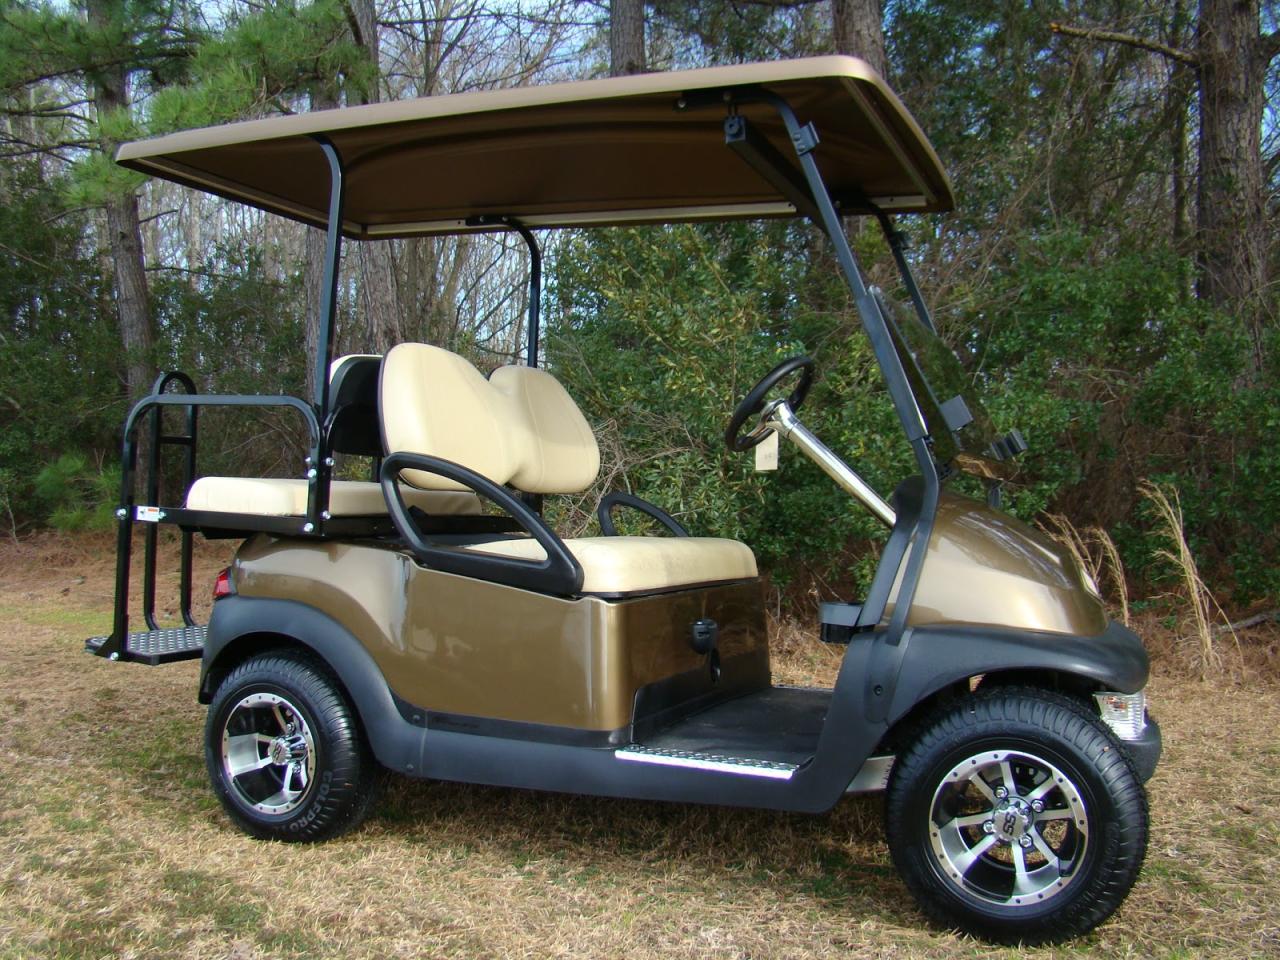 Used Golf Carts for Sale by Owner in Grant, Kansas: Find Your Perfect Ride Today!